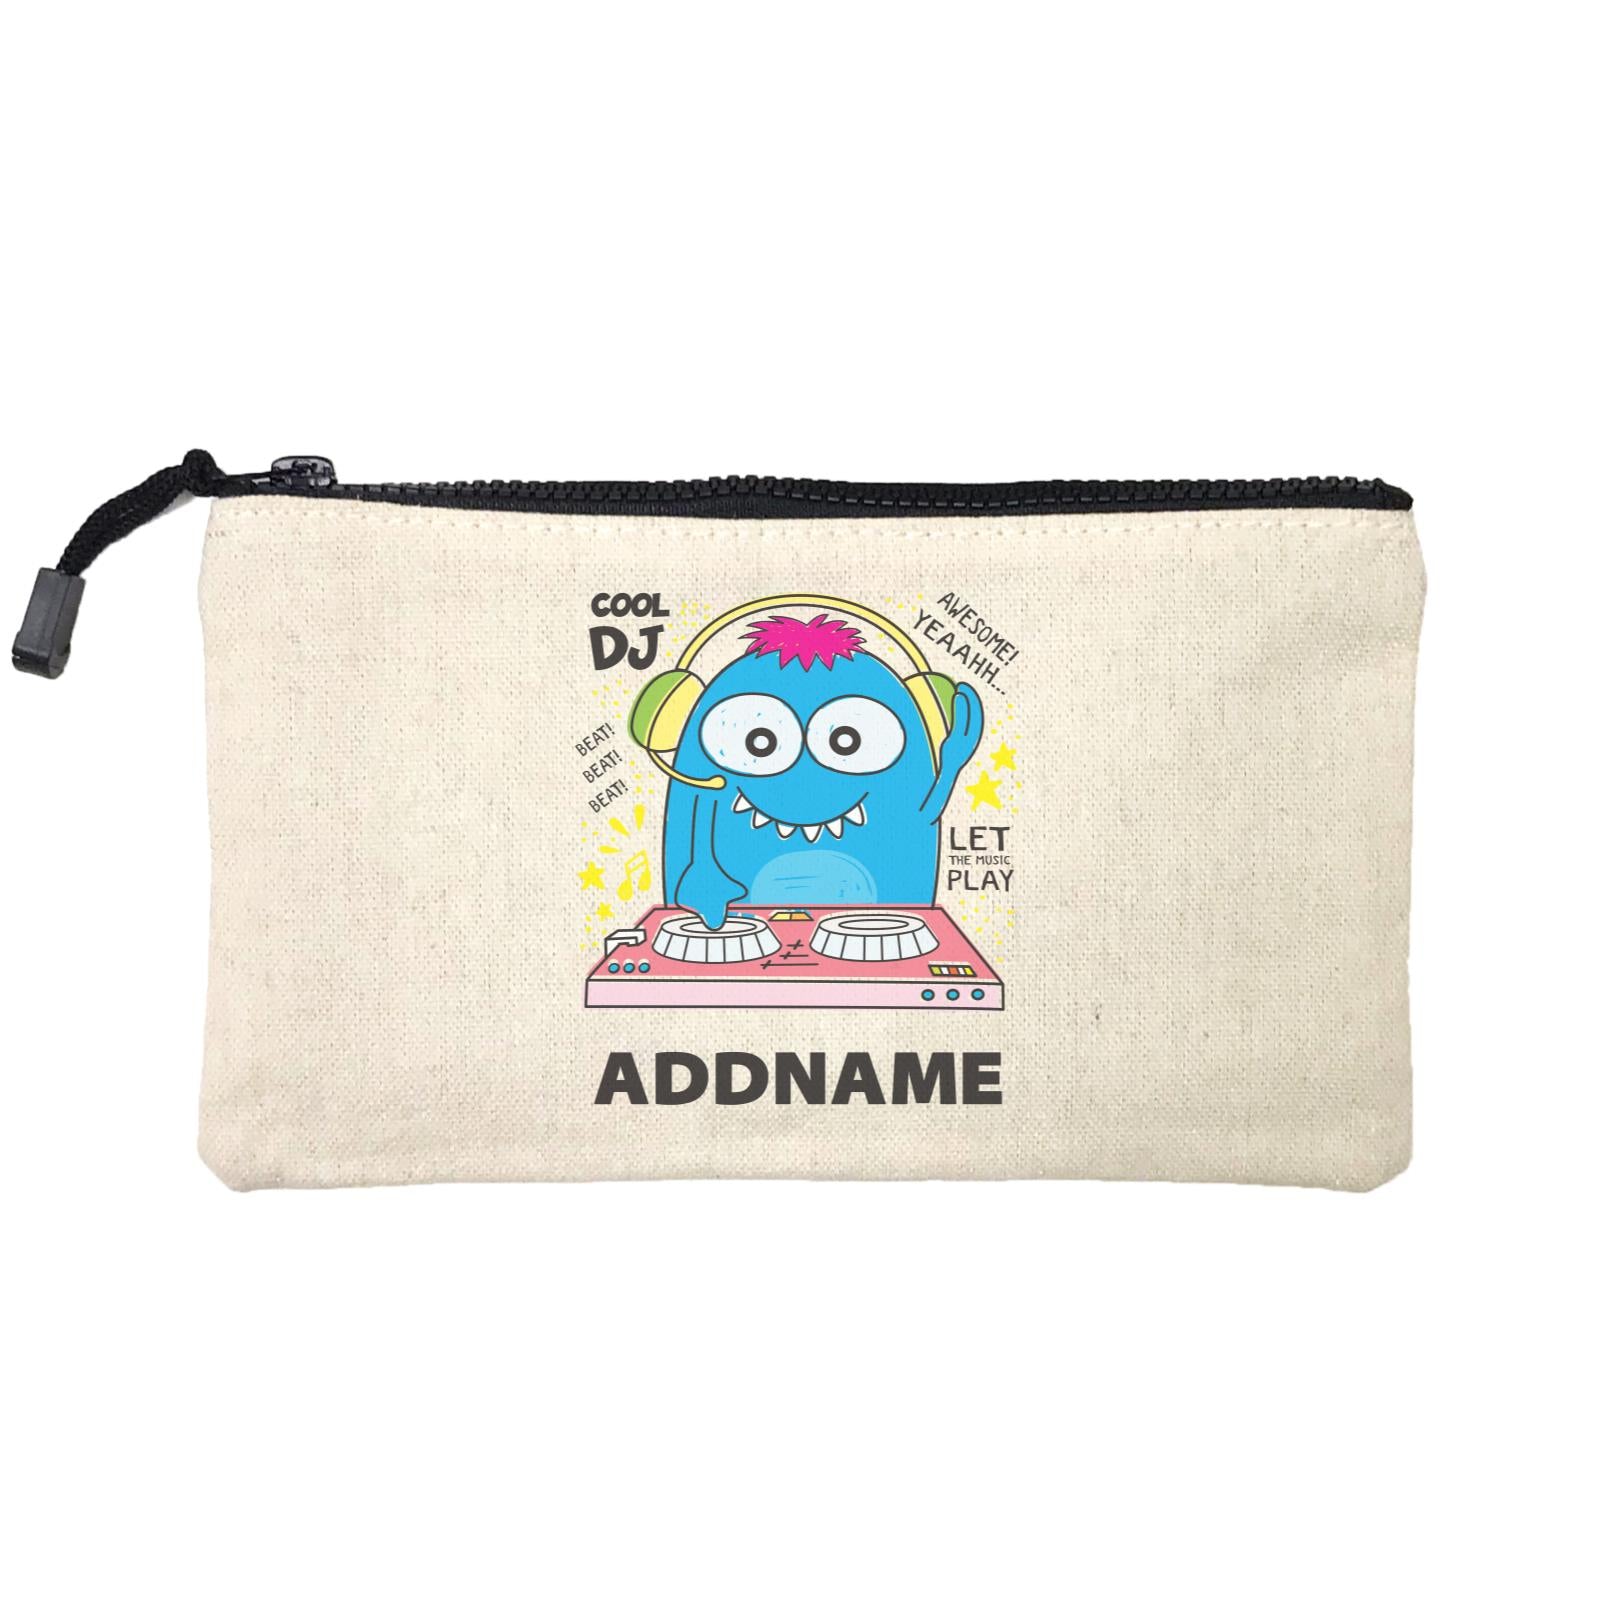 Cool Cute Monster Cool DJ Monster Addname Mini Accessories Stationery Pouch